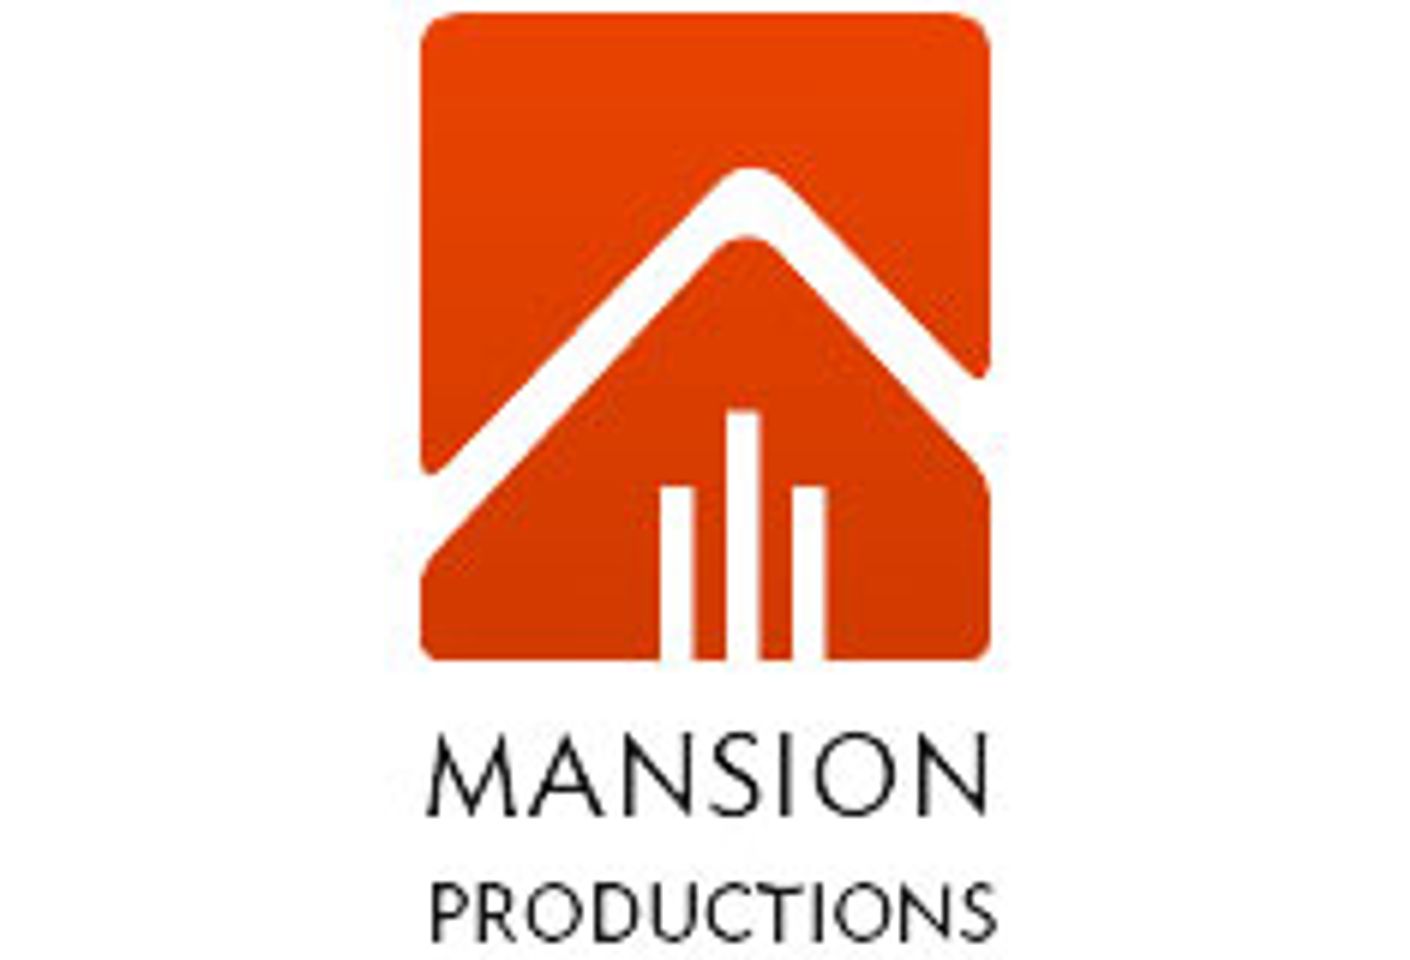 Mansion Productions' MPA3 integrates DocuSign